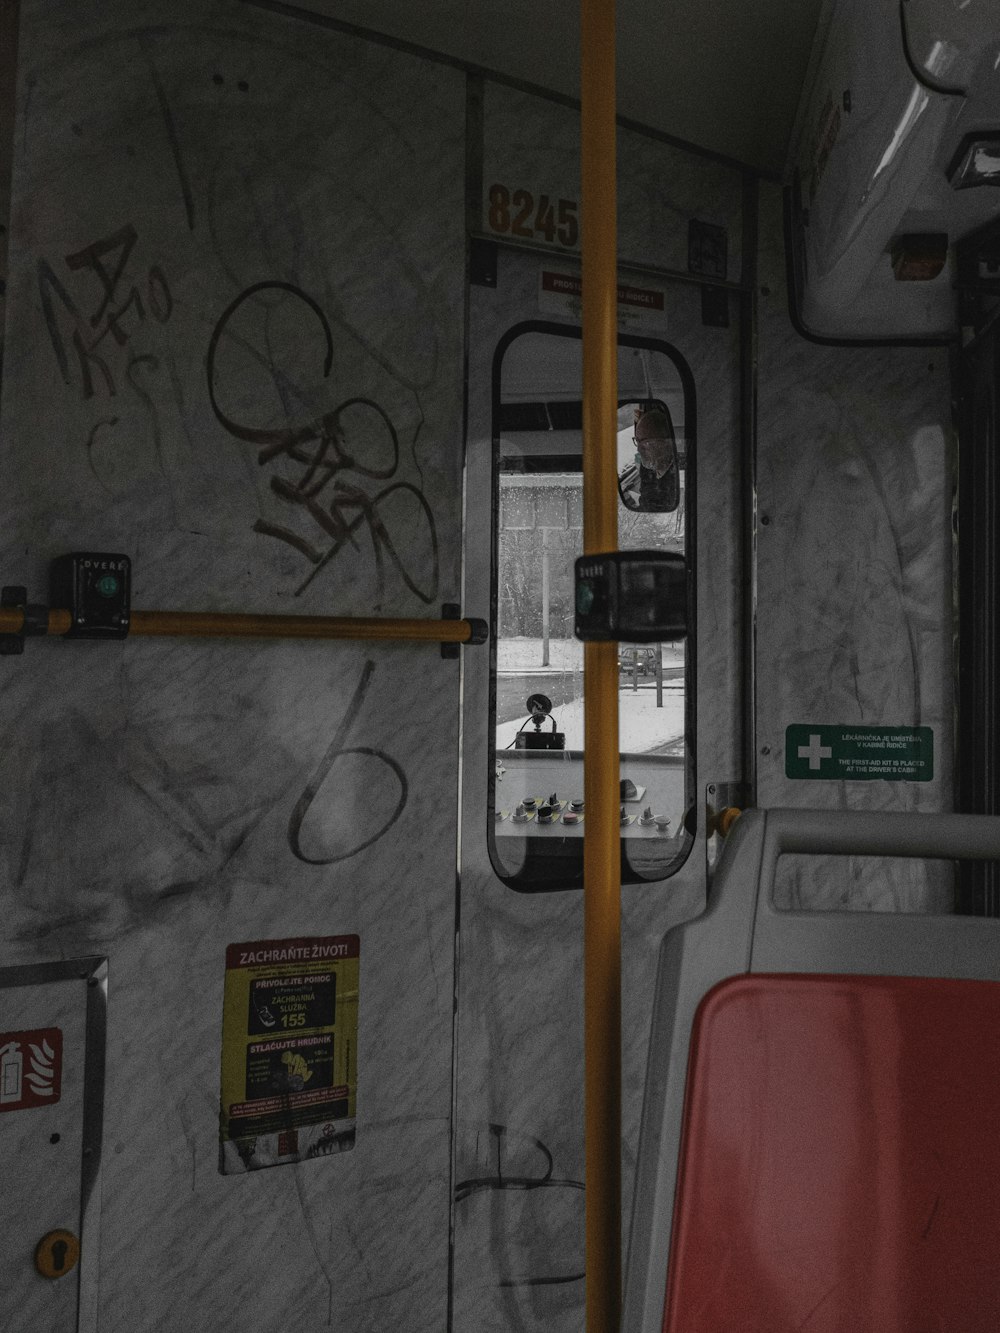 the inside of a bus with graffiti on the walls